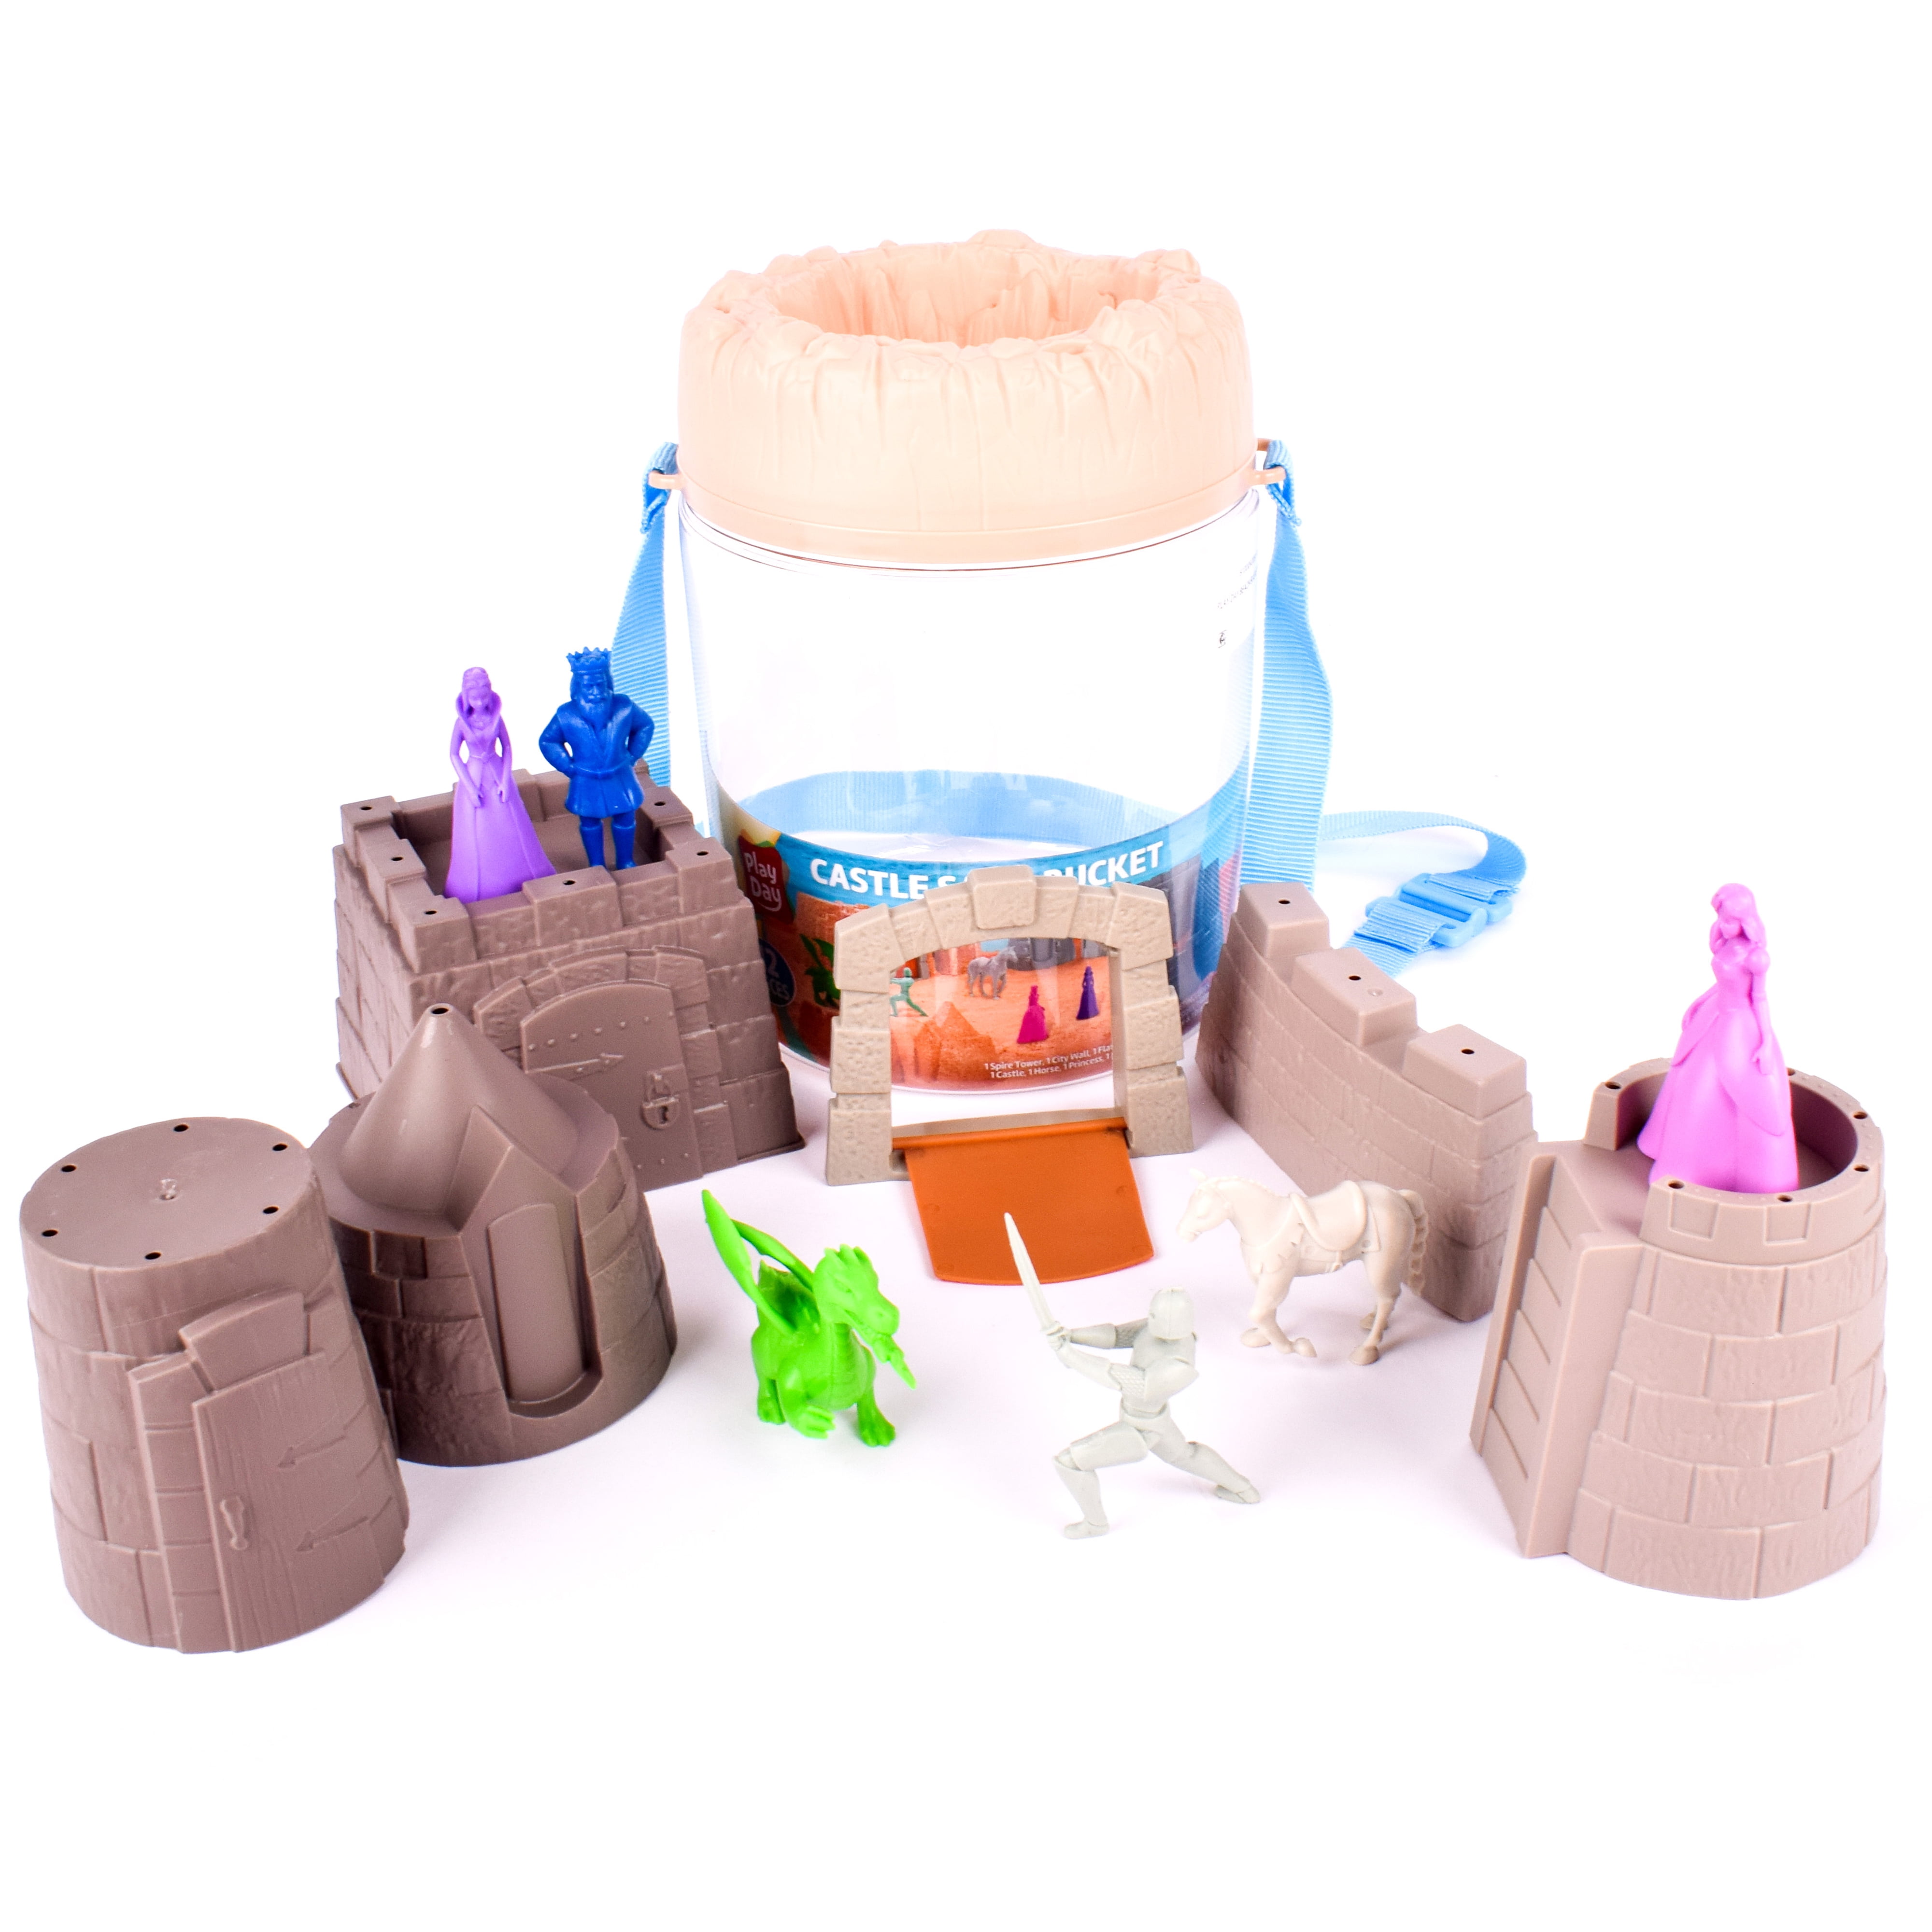 Play Day Castle Sand Bucket Playset  12 Piece Set with Storage Bucket | Unisex, Ages 3+